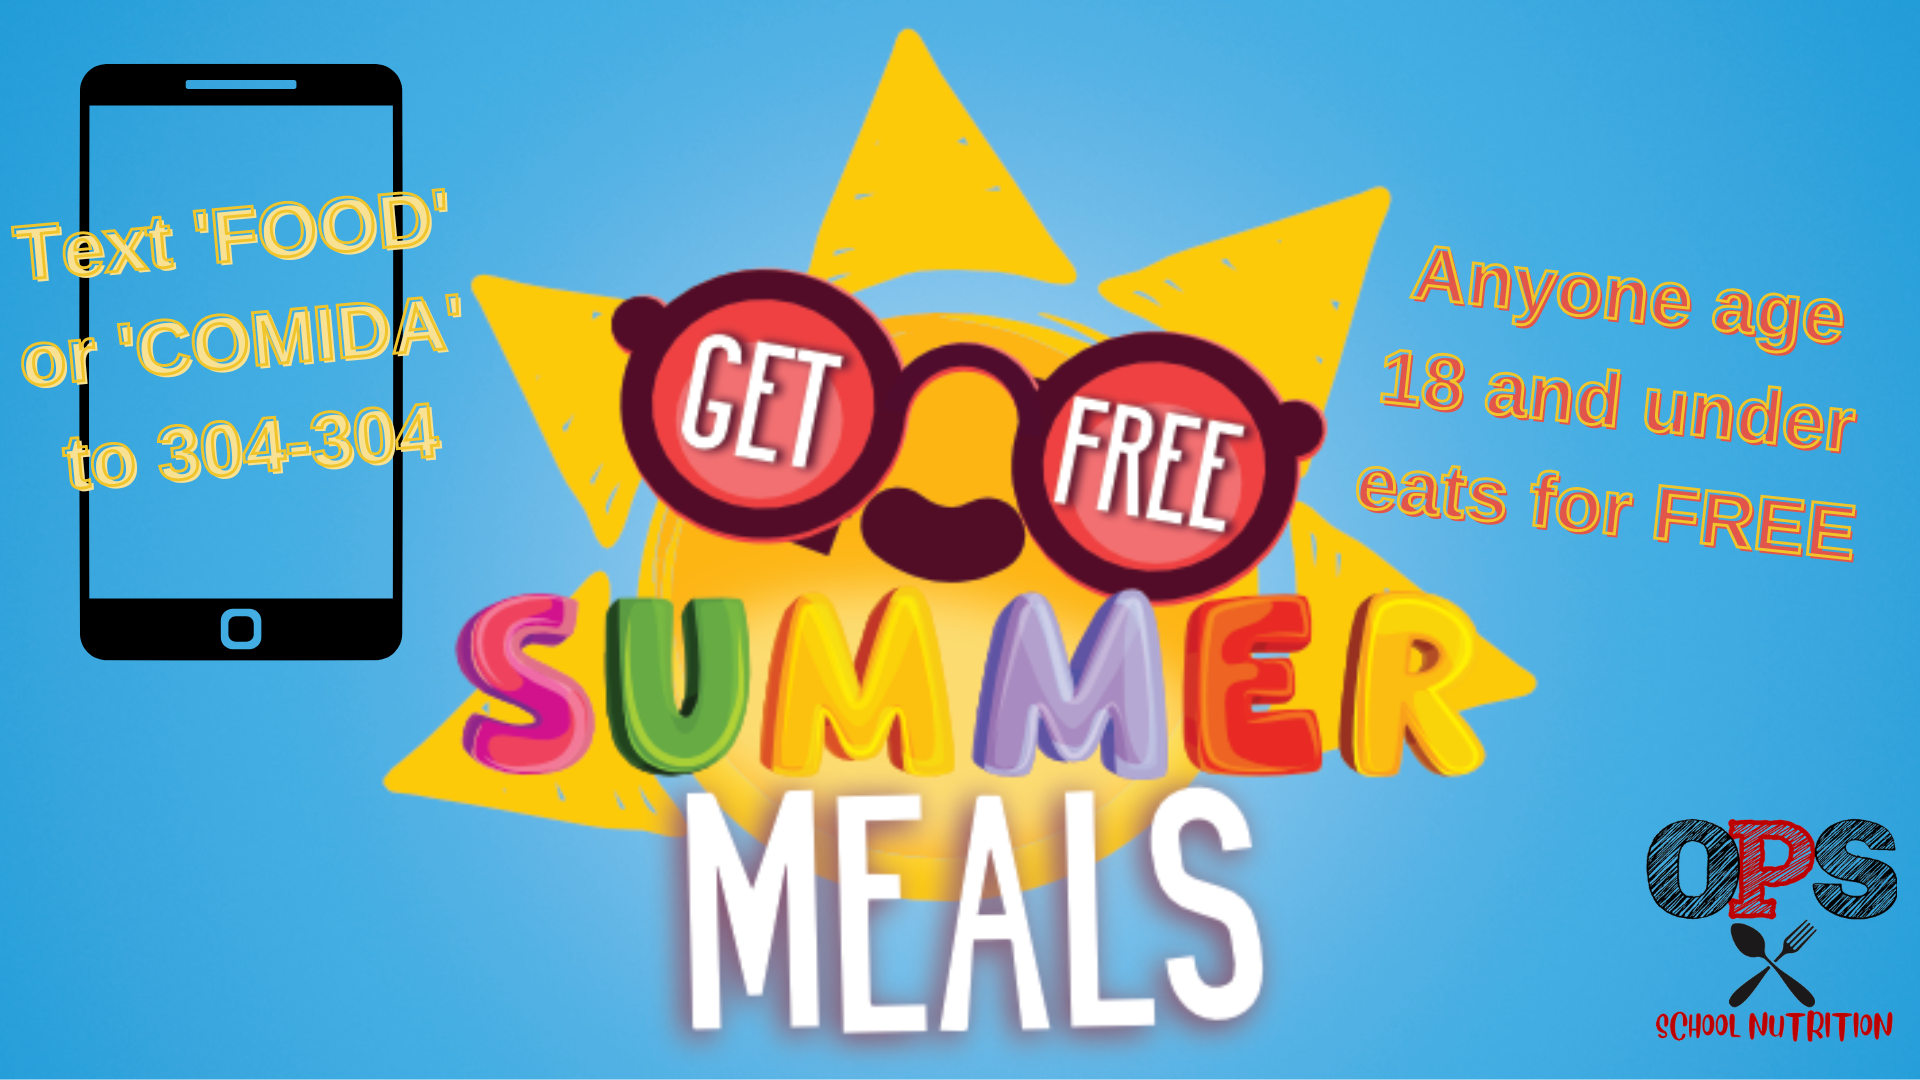 Text food or comida to 304-304 - free summer meals for 18 and under